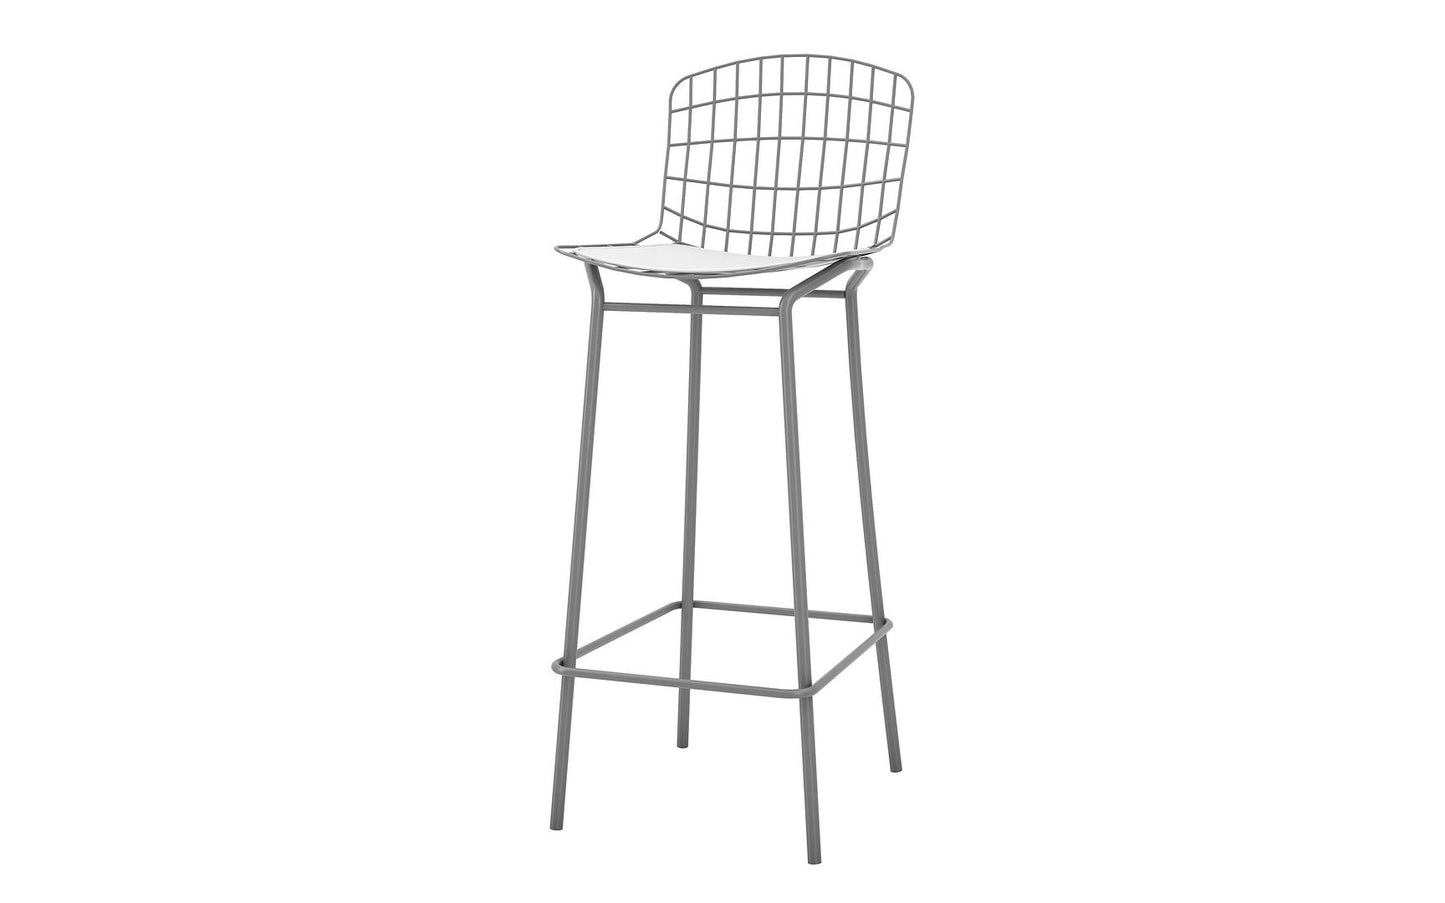 Manhattan Comfort Madeline 41.73" Barstool with Seat Cushion in Charcoal Grey and White (Set of 2)